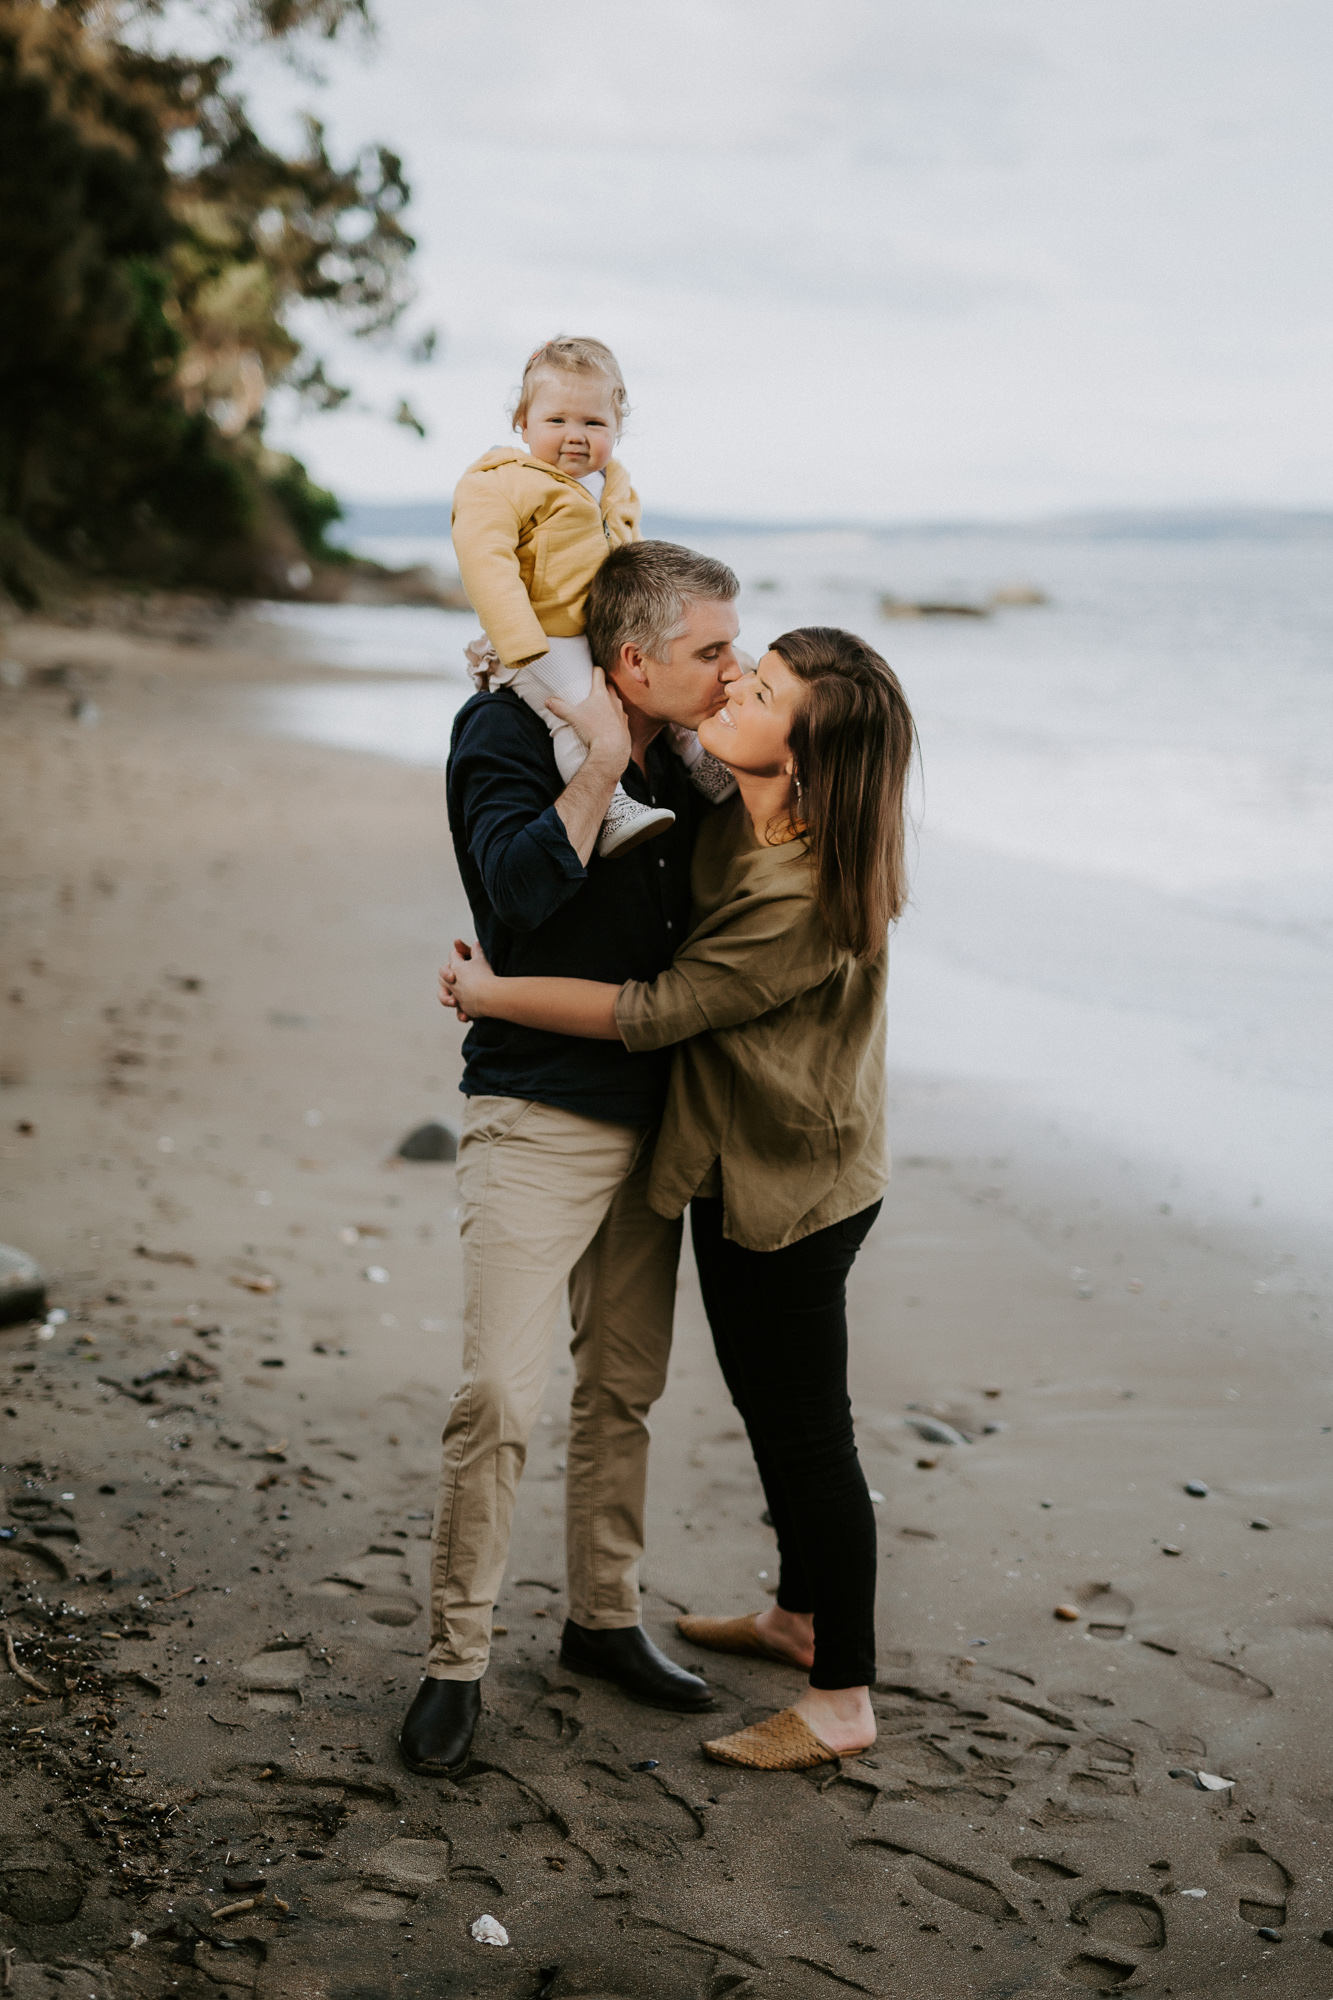 Hinsby Beach Family by Ulla Nordwood – 0004